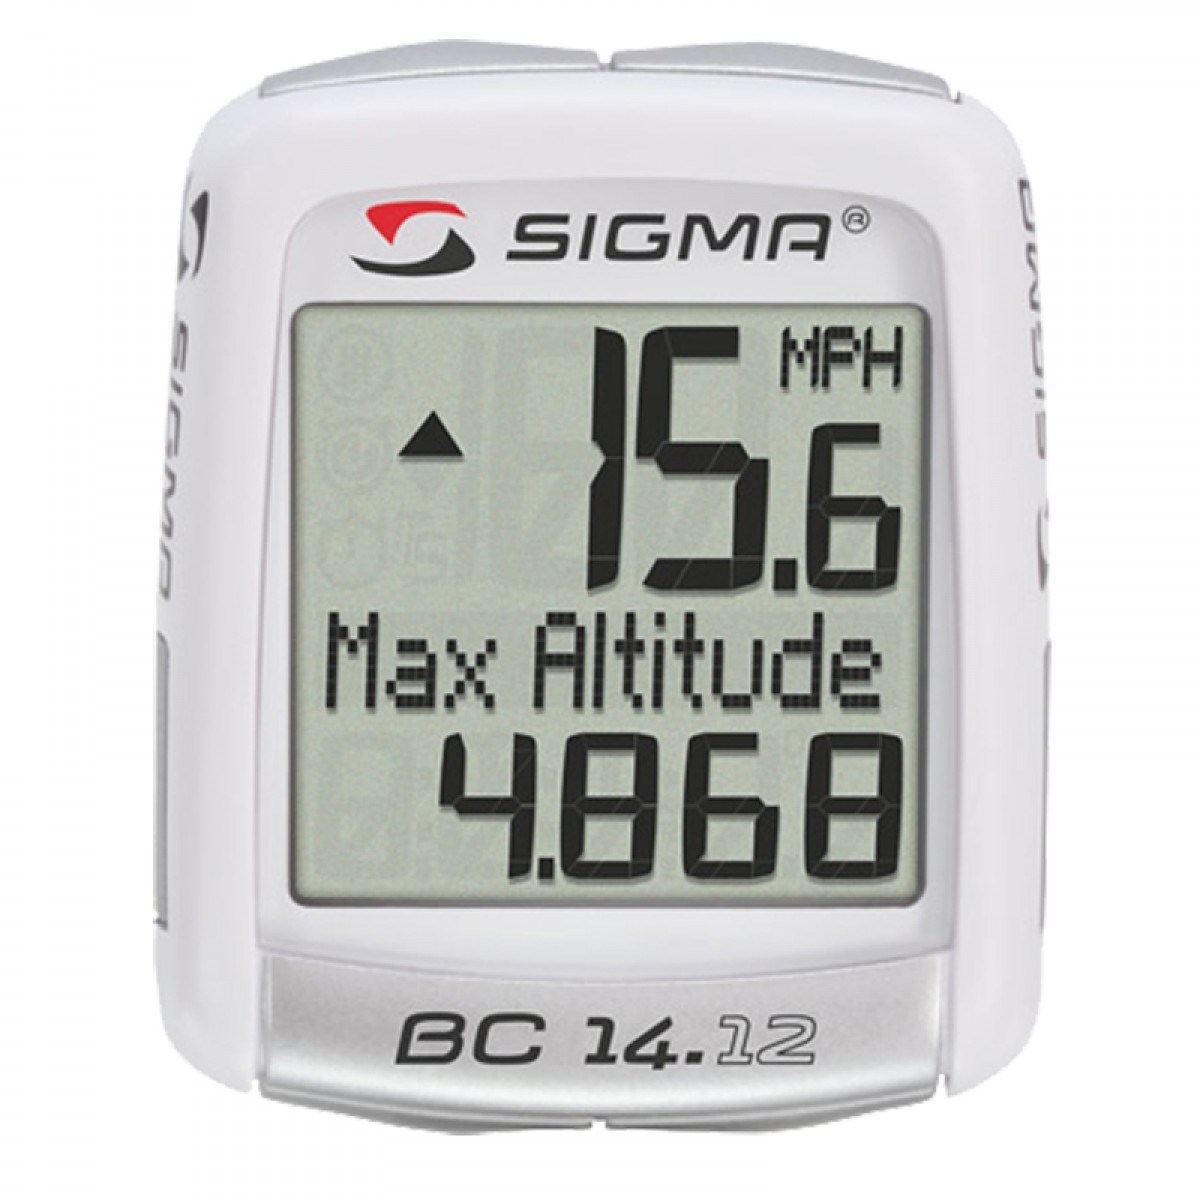 Sigma BC 14.12 Altitude 15 Function Cycle Computer product image